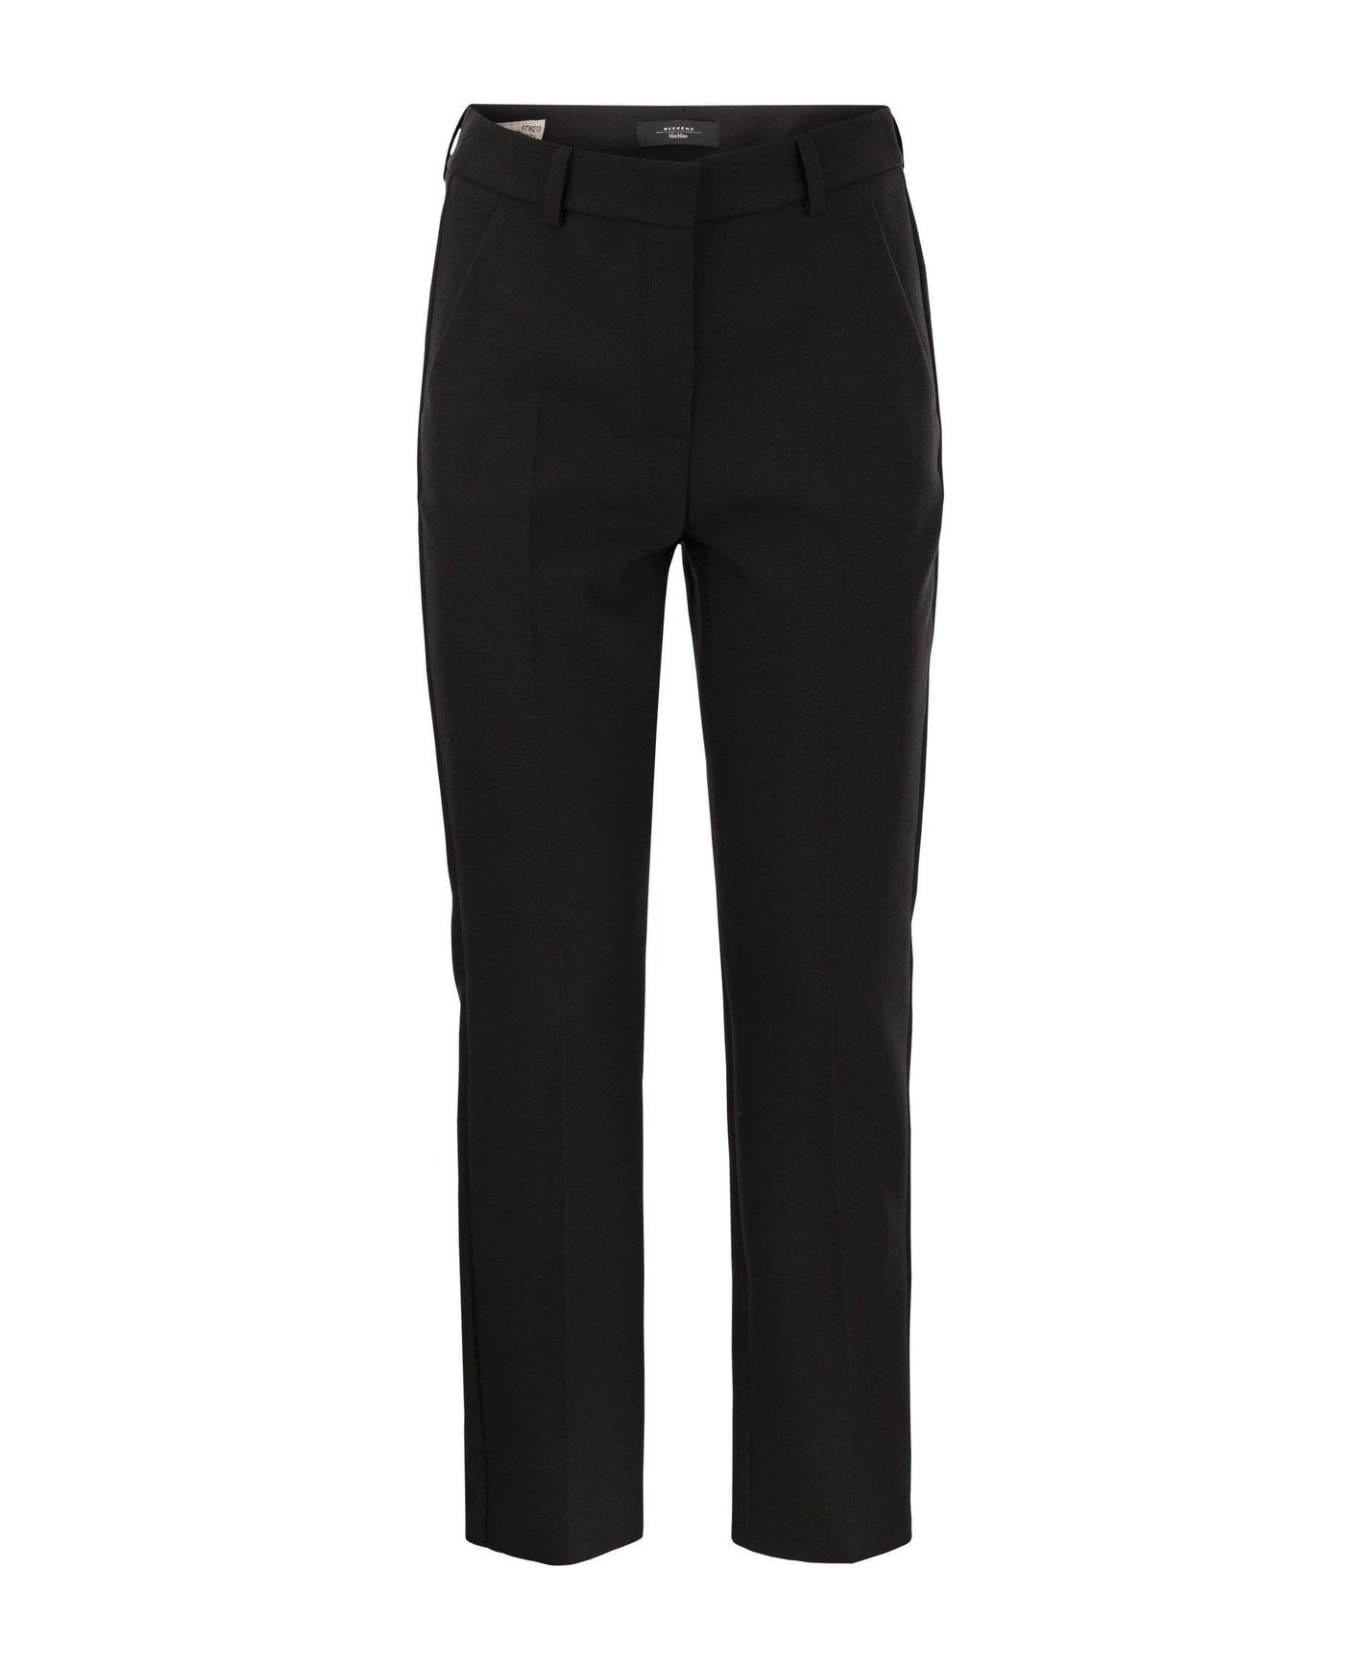 Weekend Max Mara Straight Fit Trousers - BLACK ボトムス